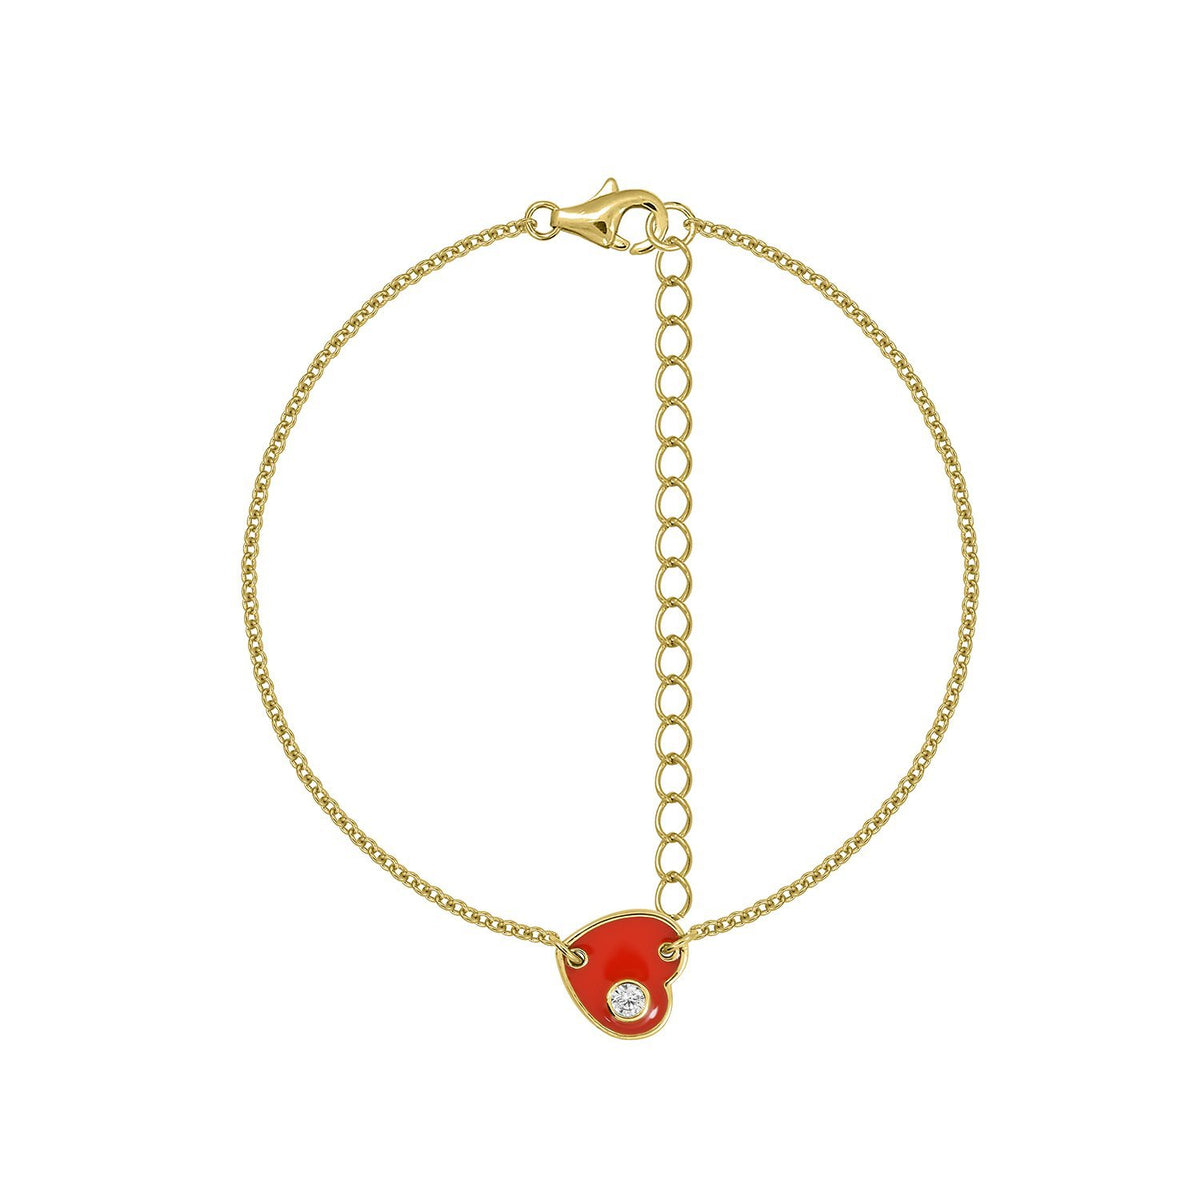 Red Enamel Heart Bracelet with Accent